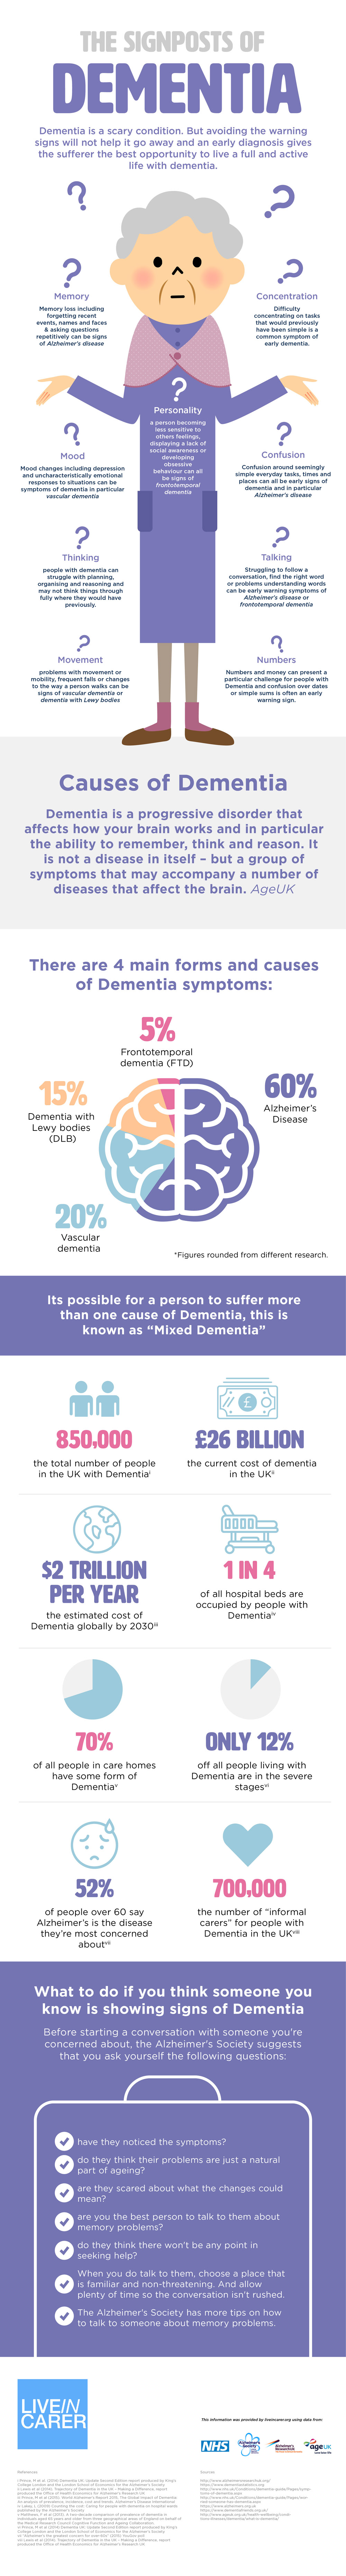 signs and symptoms of dementia